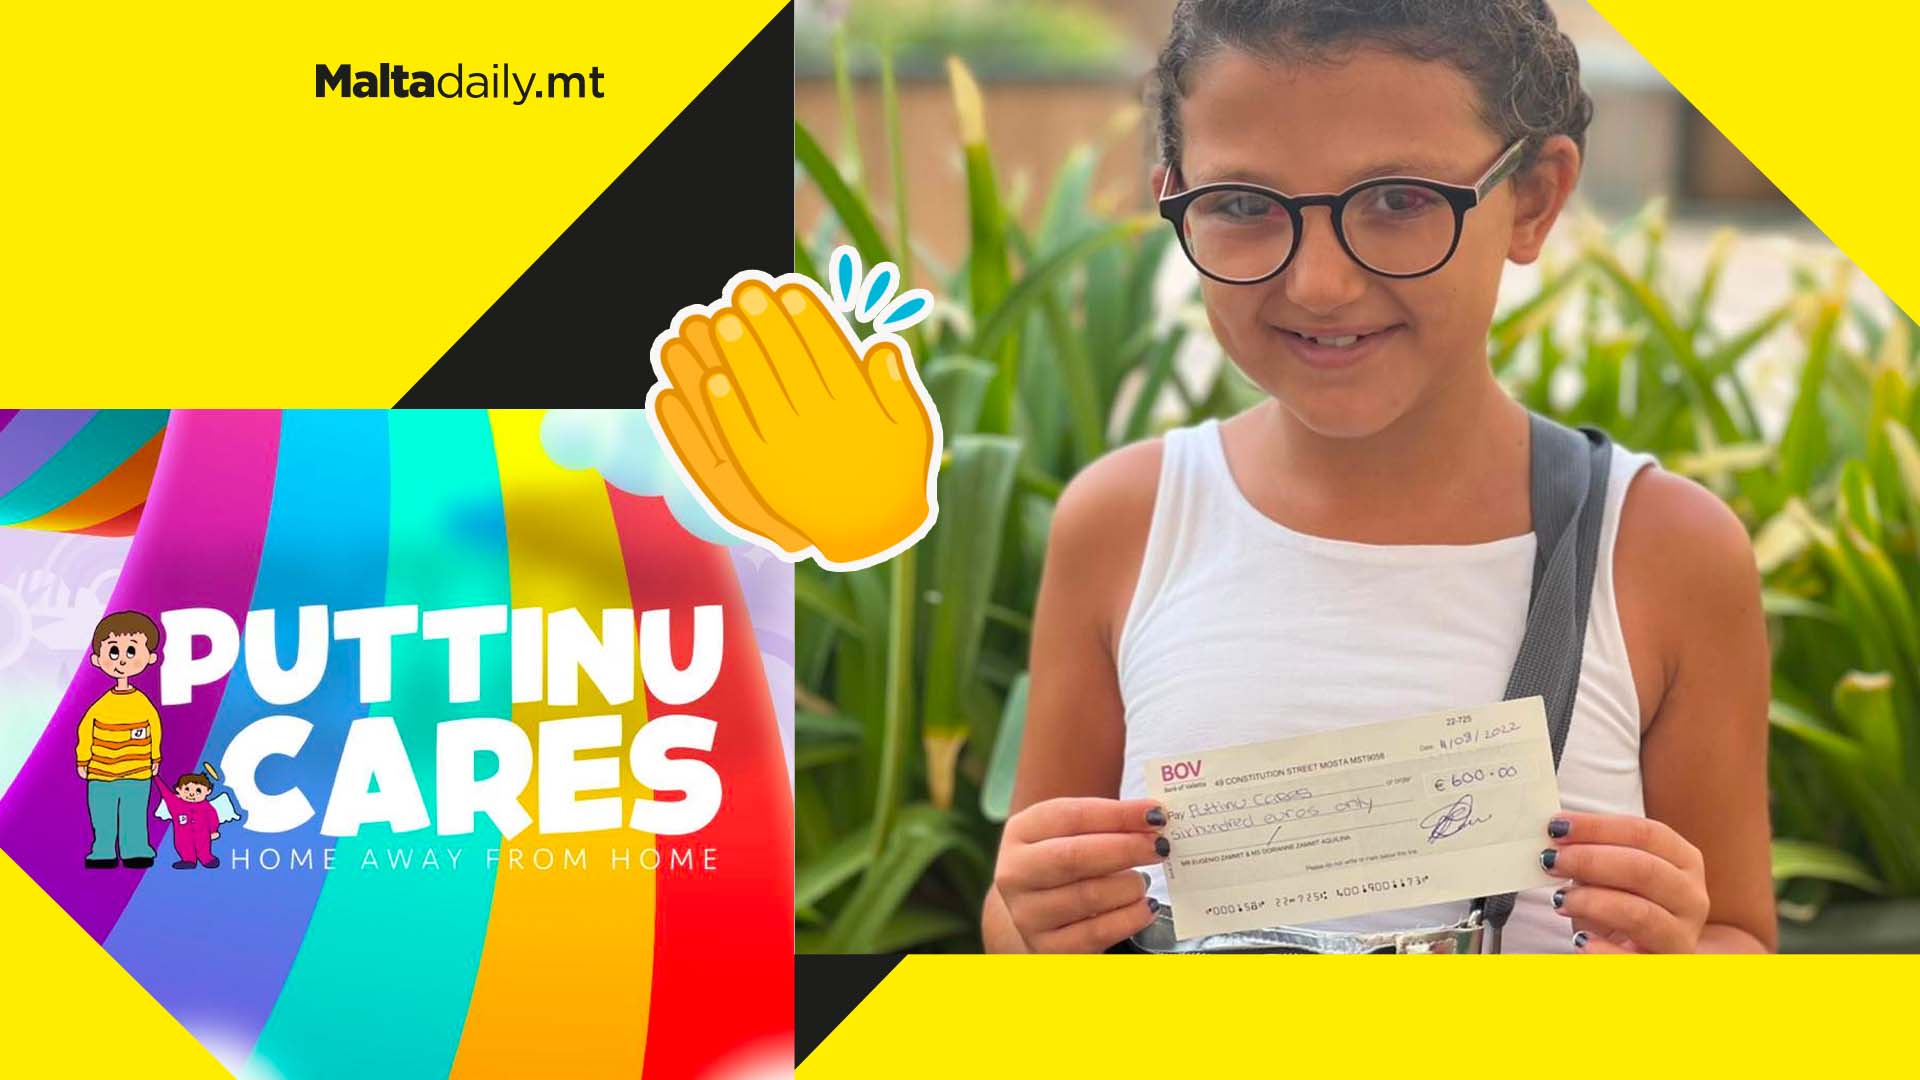 11 year old girl collects €600 to donate to Puttinu on her birthday